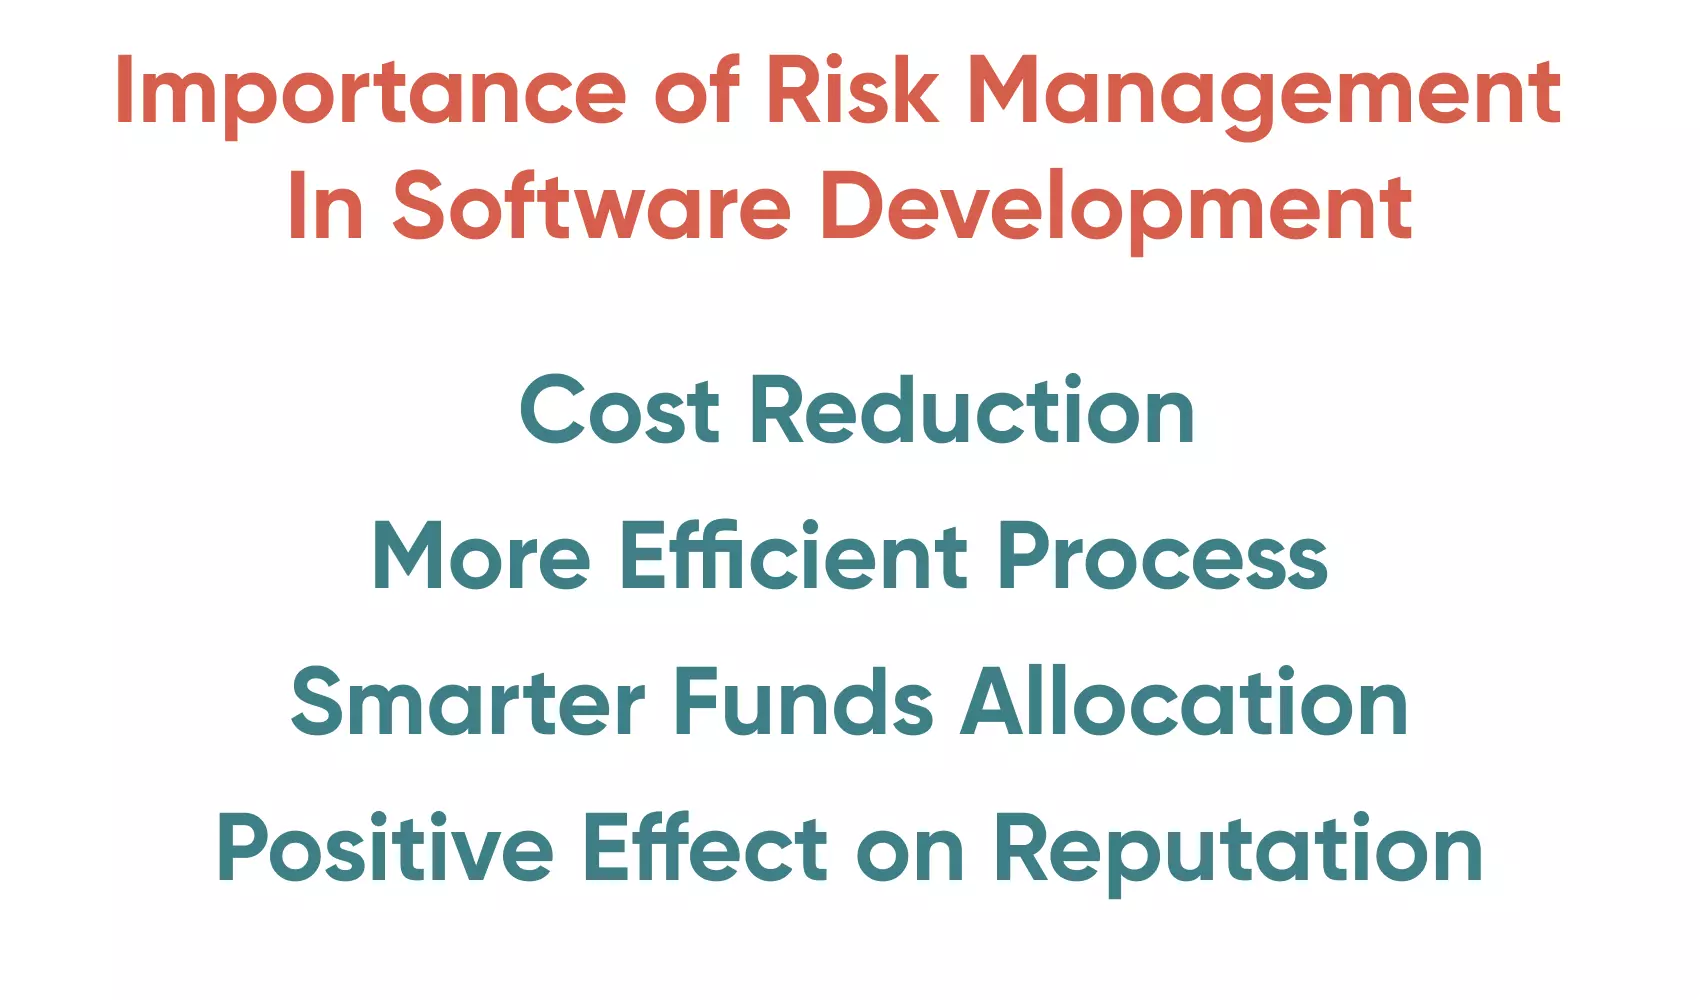 There are many reasons for integrating Risk Management, as there are many benefits.